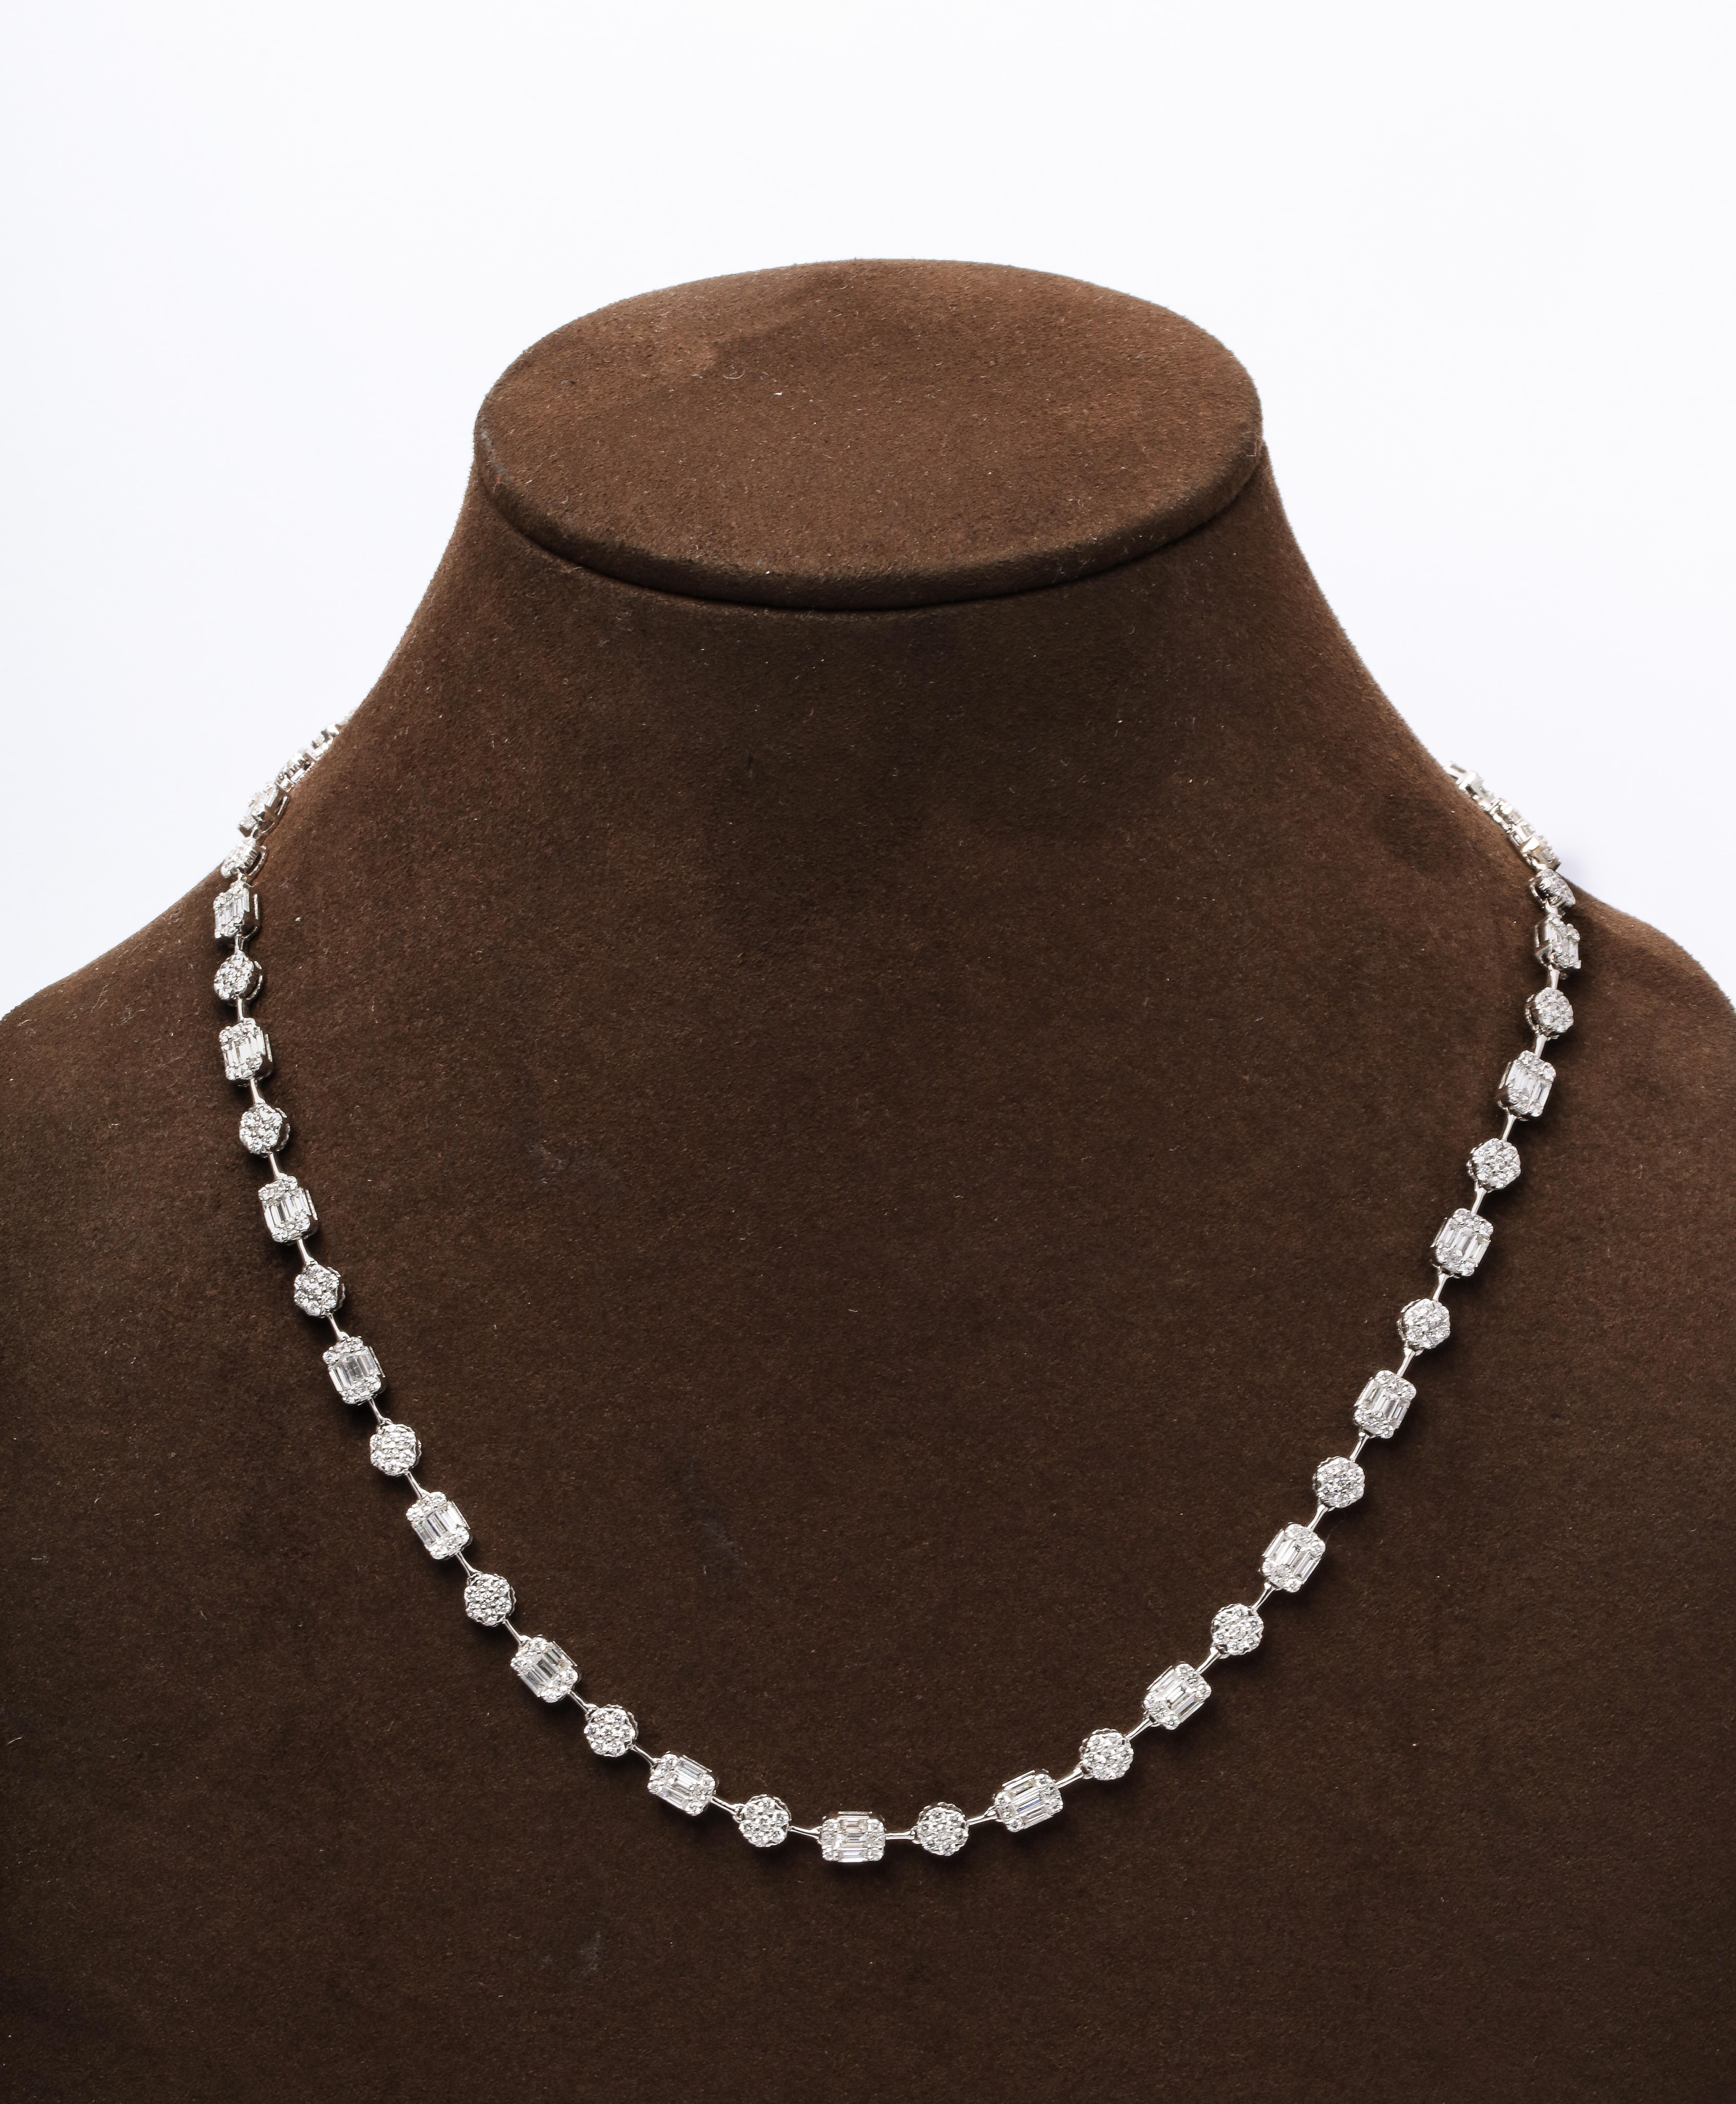 
An stunning multi shape diamond illusion set necklace.

7.70 carats of white round and baguette diamonds set in 18k white gold 

17.25 inch length that can be adjusted